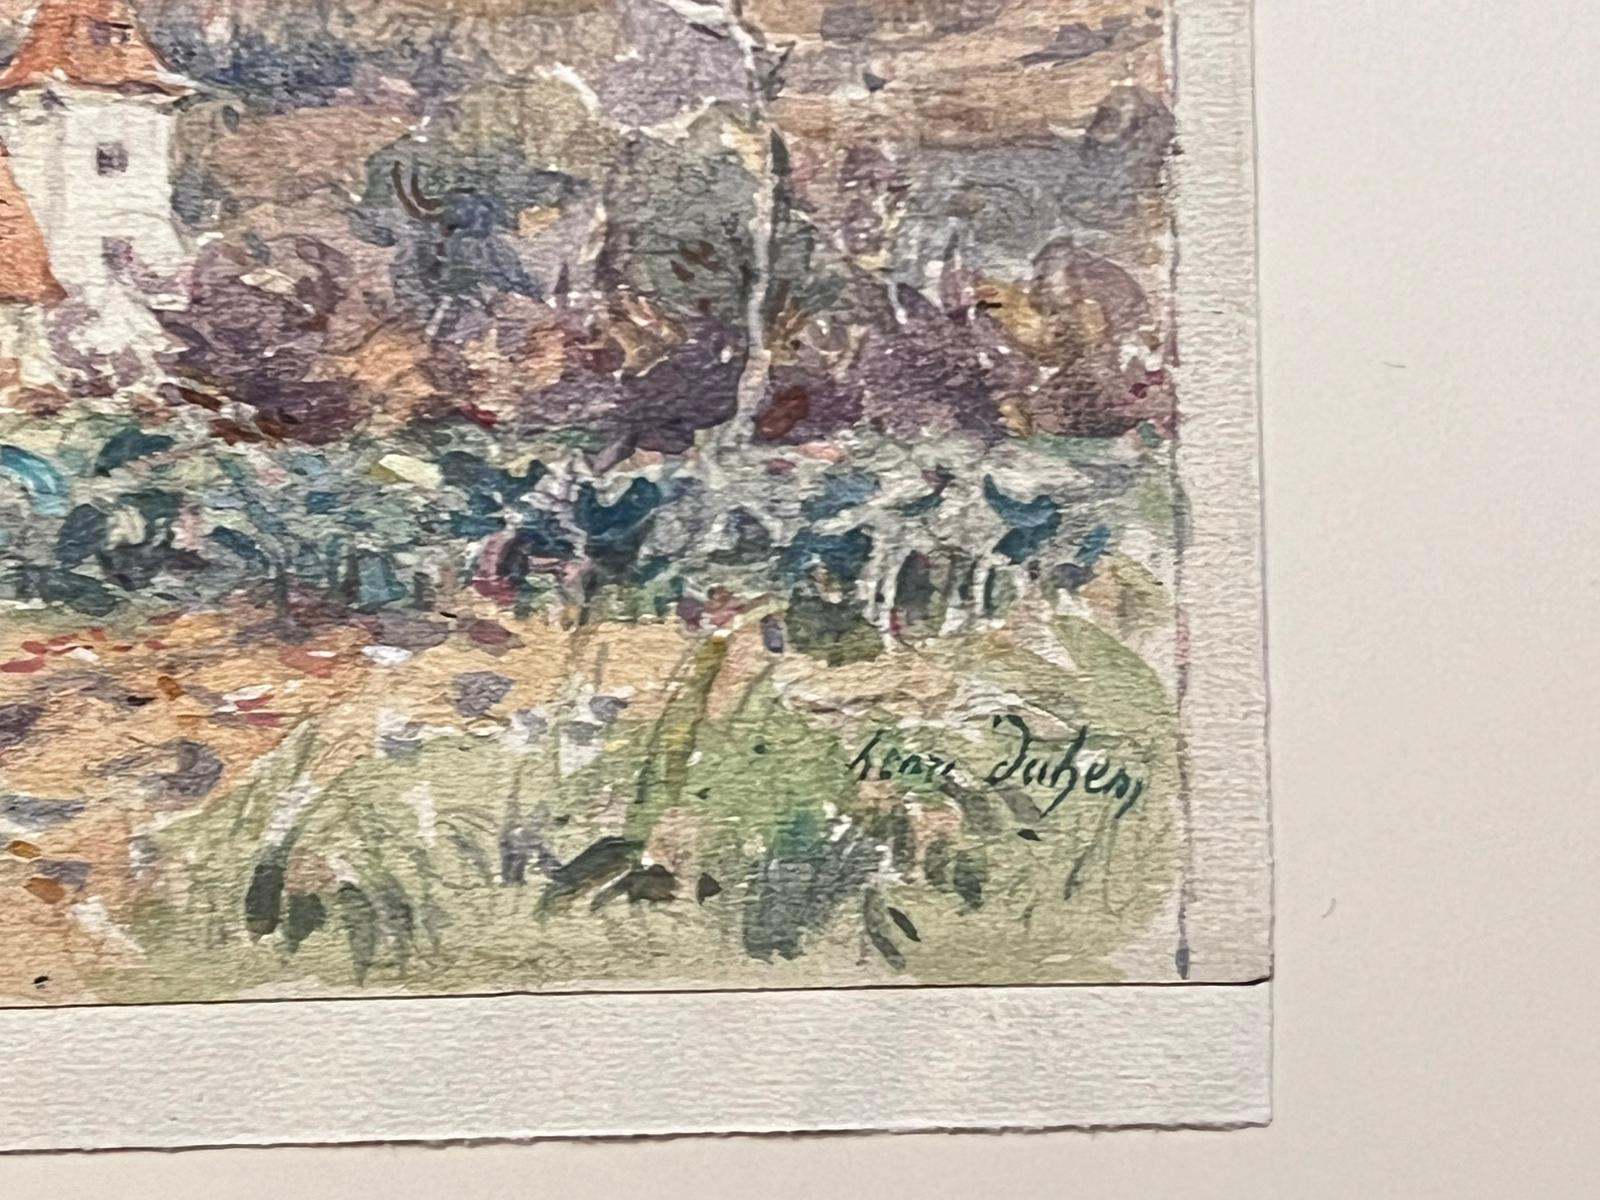 The artist: 
Henri Aime Duhem (1860-1941) French *see notes below, signed 

Title: The French Landscape

Medium:  
gouache on paper, loosely laid over card, unframed

card: 9.75 x 12.75 inches
painting: 5 x 6.5 inches

Provenance: 
private